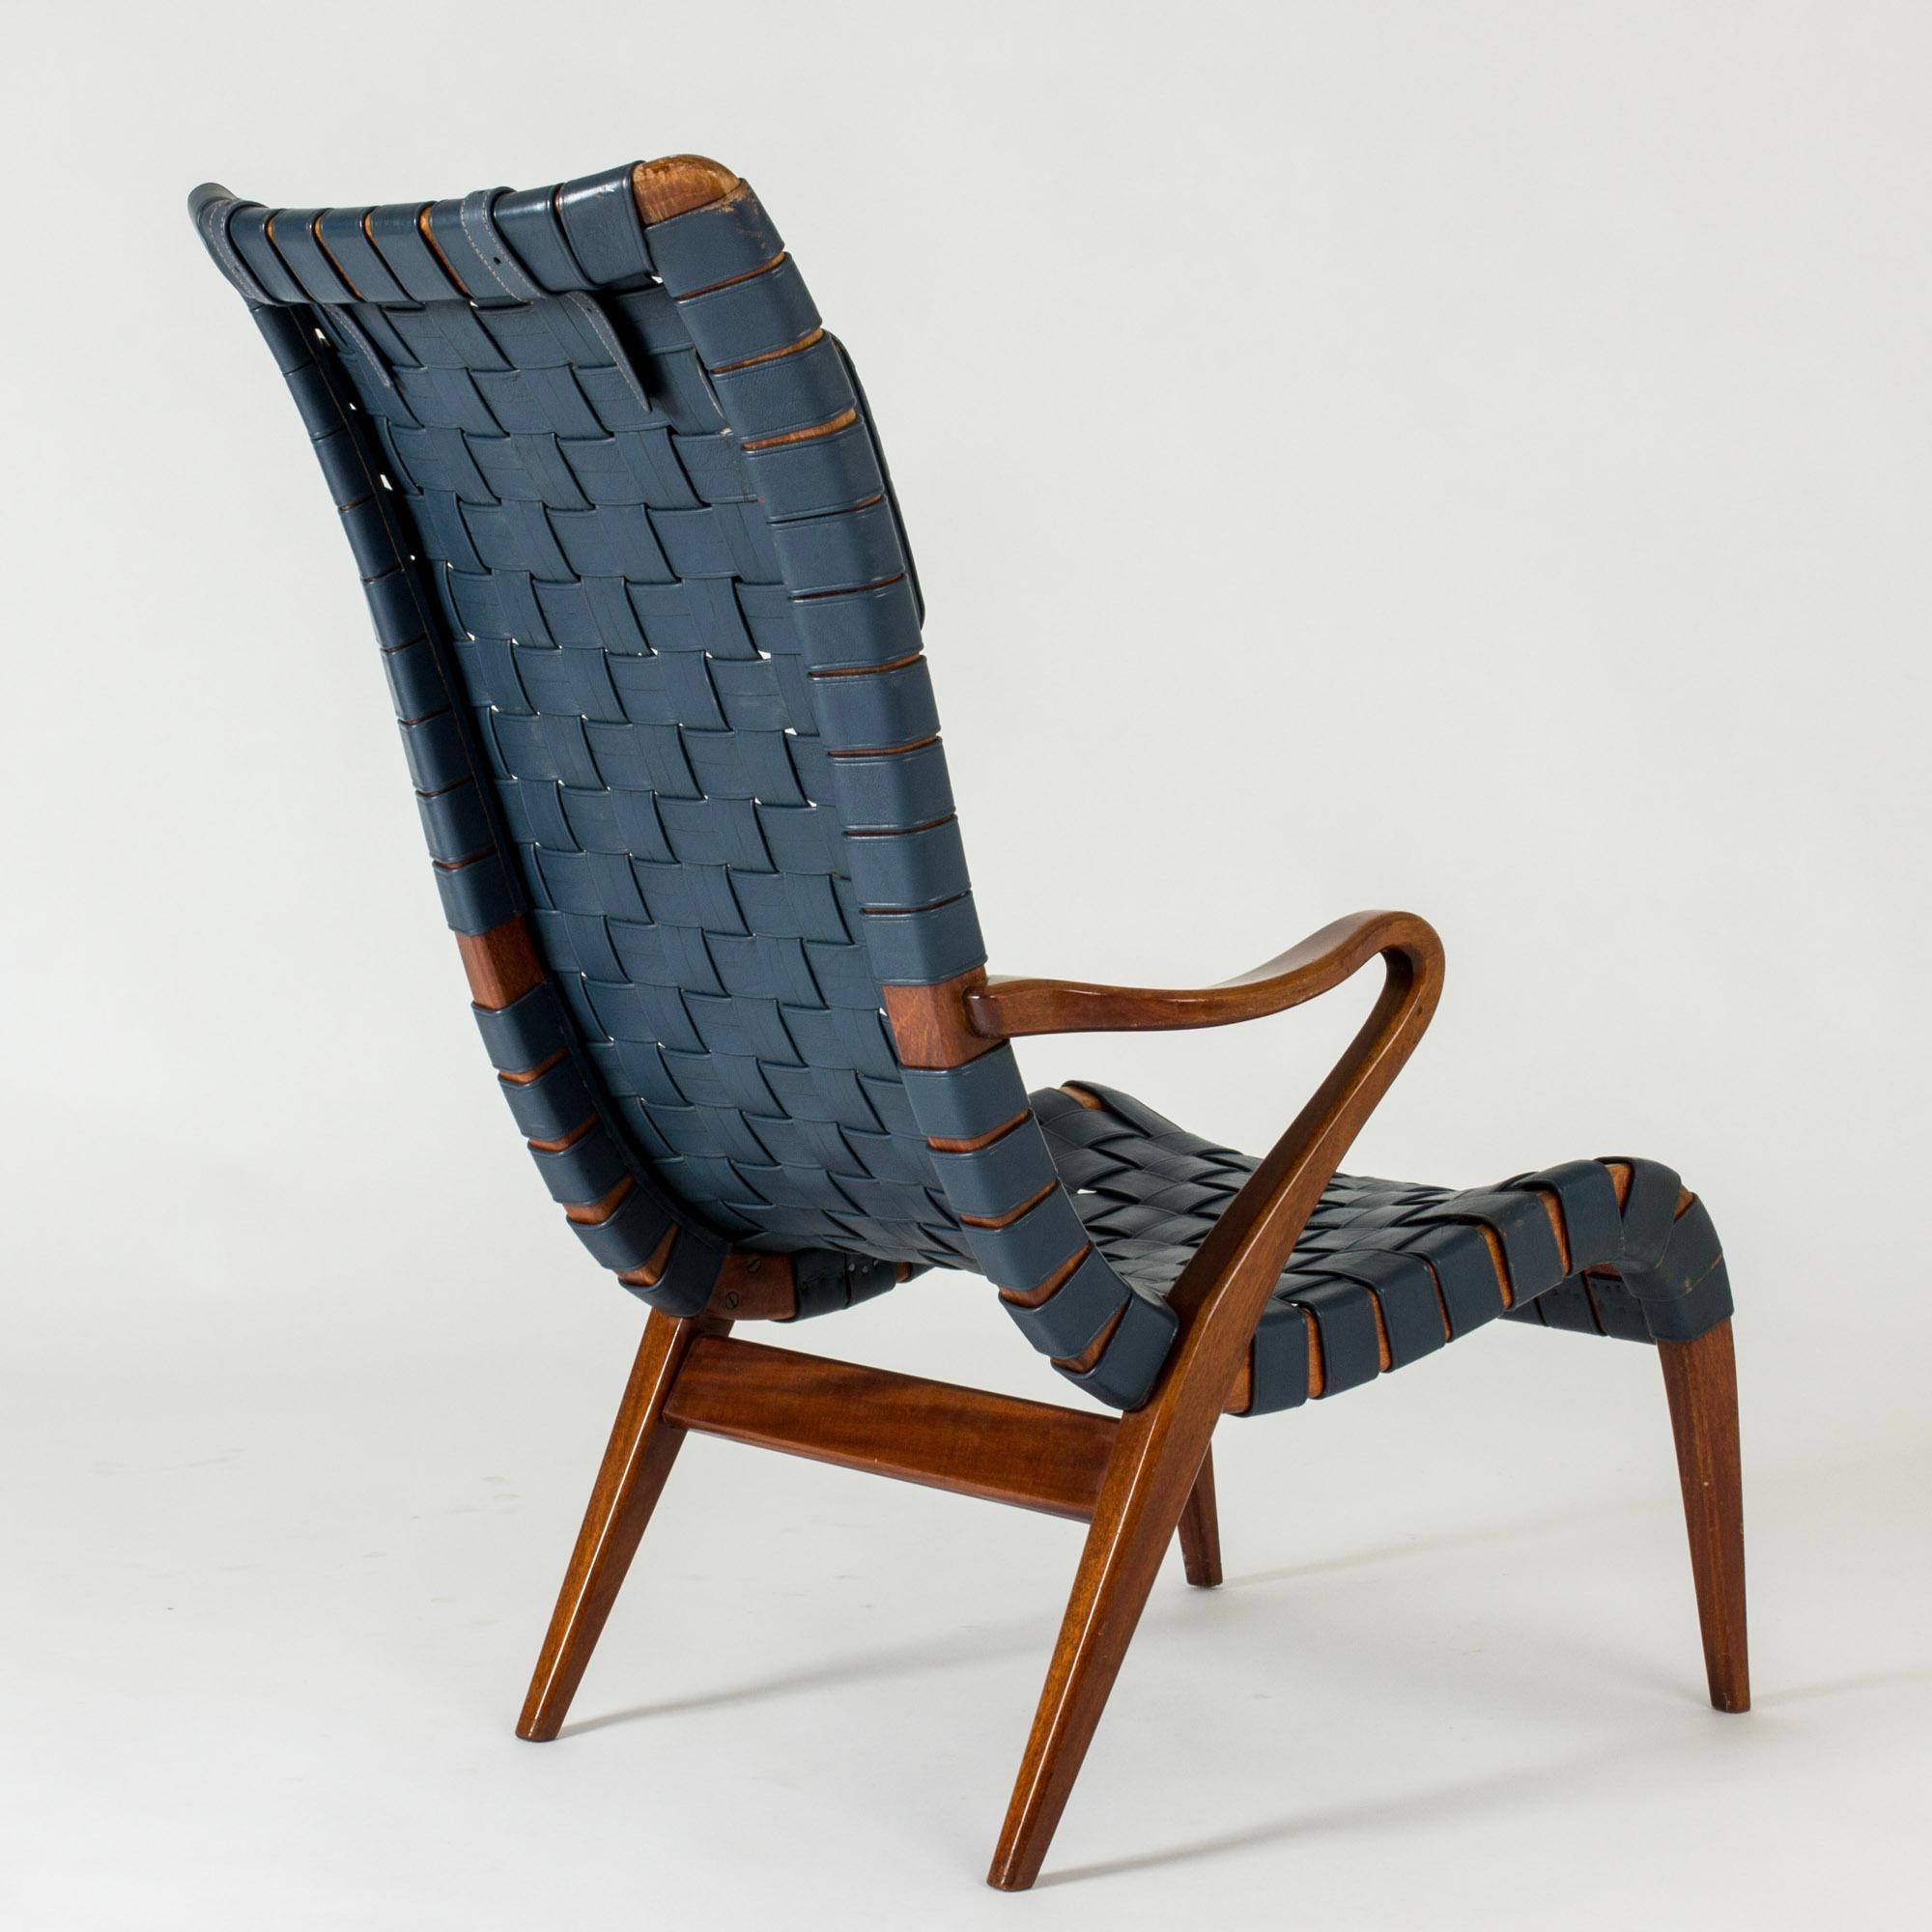 Swedish Scandinavian Modern Lounge Chair and Footstool by Axel Larsson, Sweden, 1950s For Sale